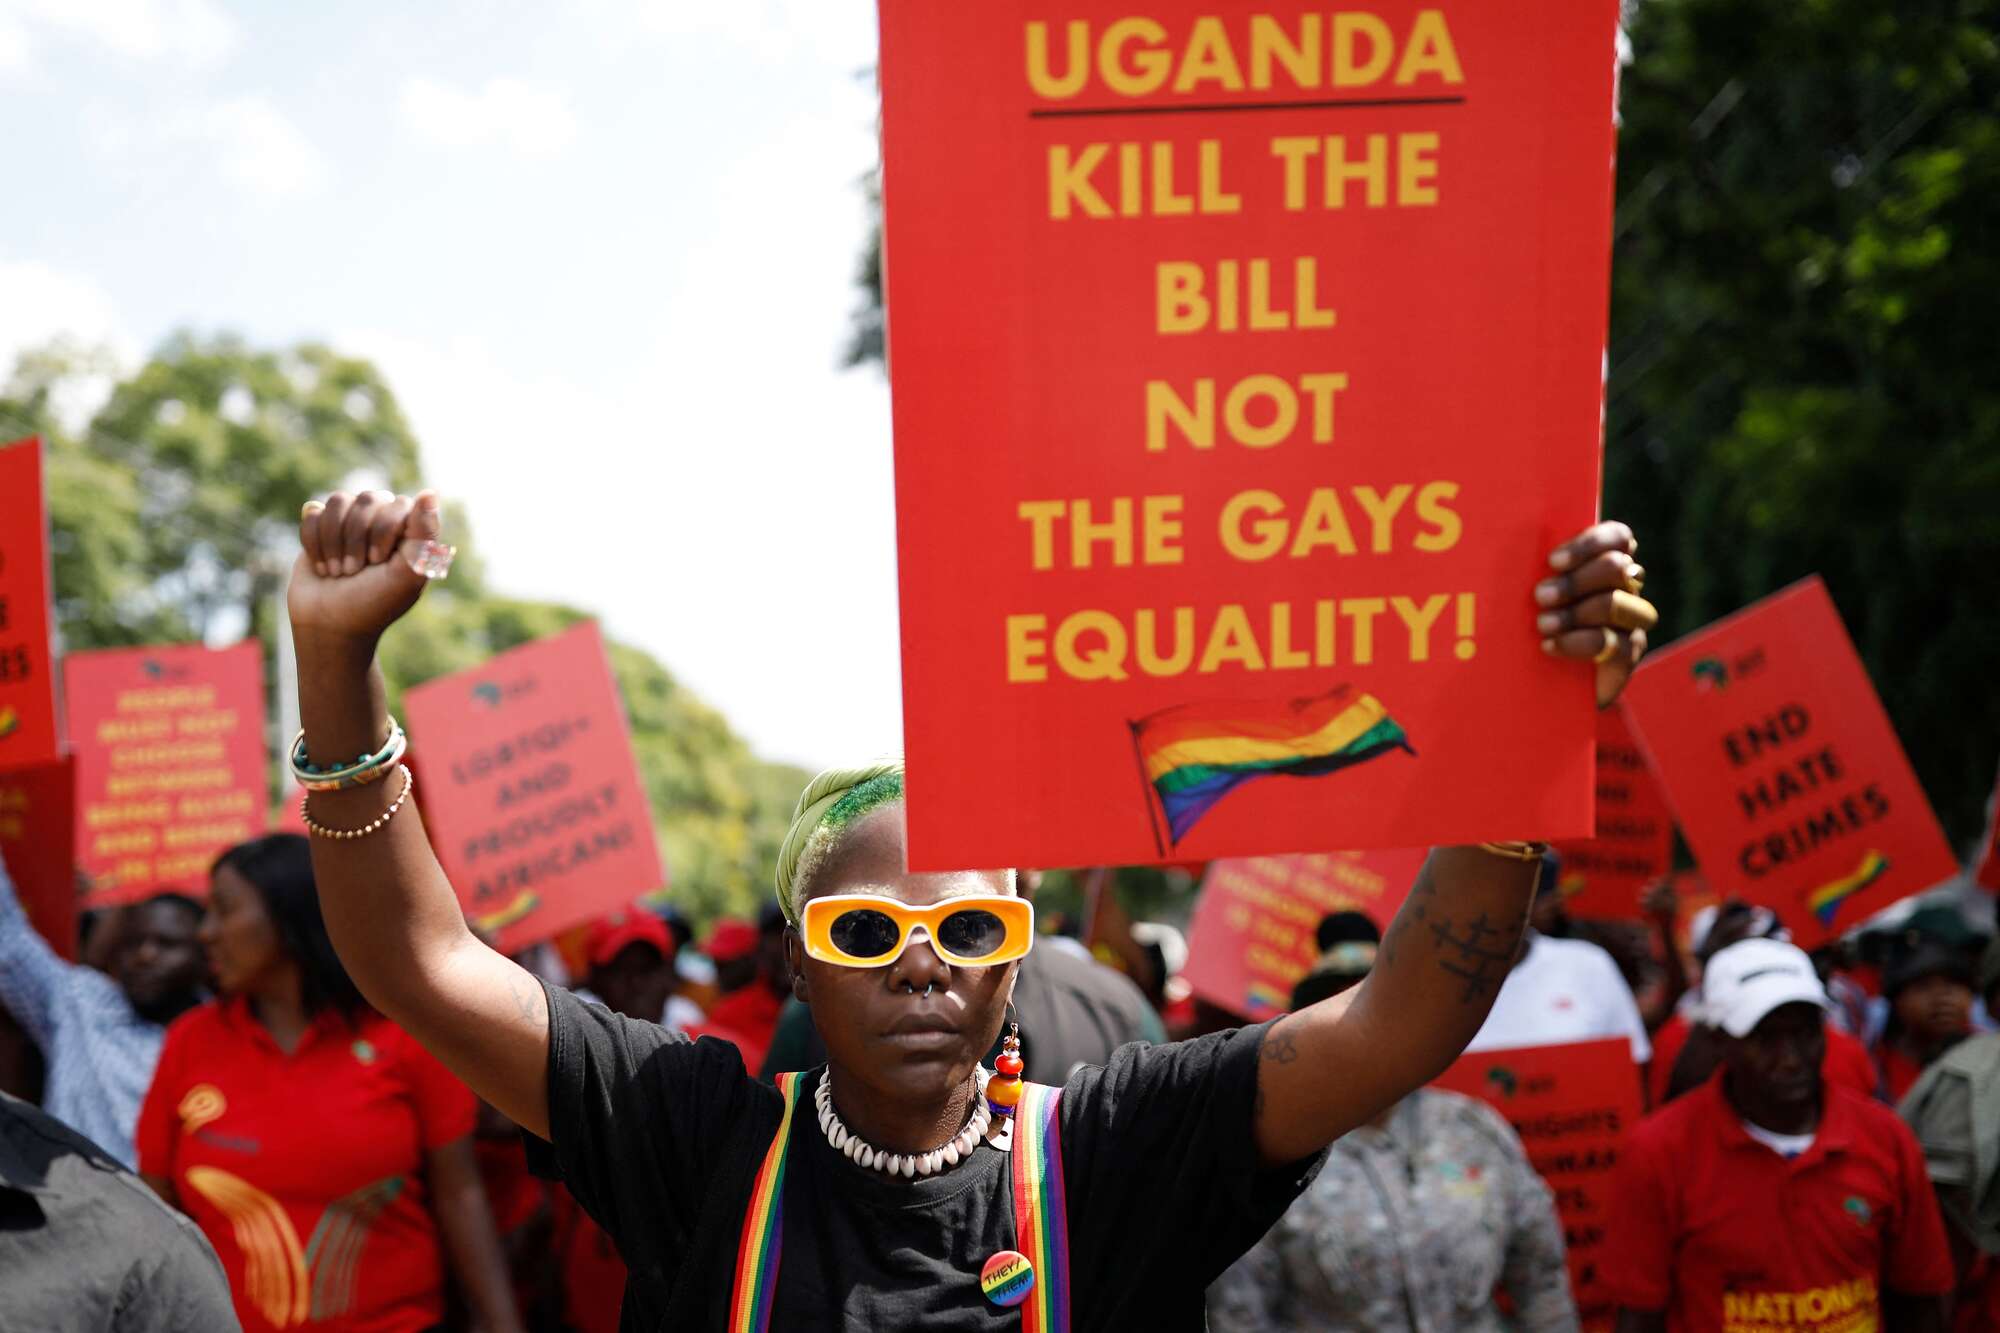 Ugandan activists call for sanctions over anti-gay law